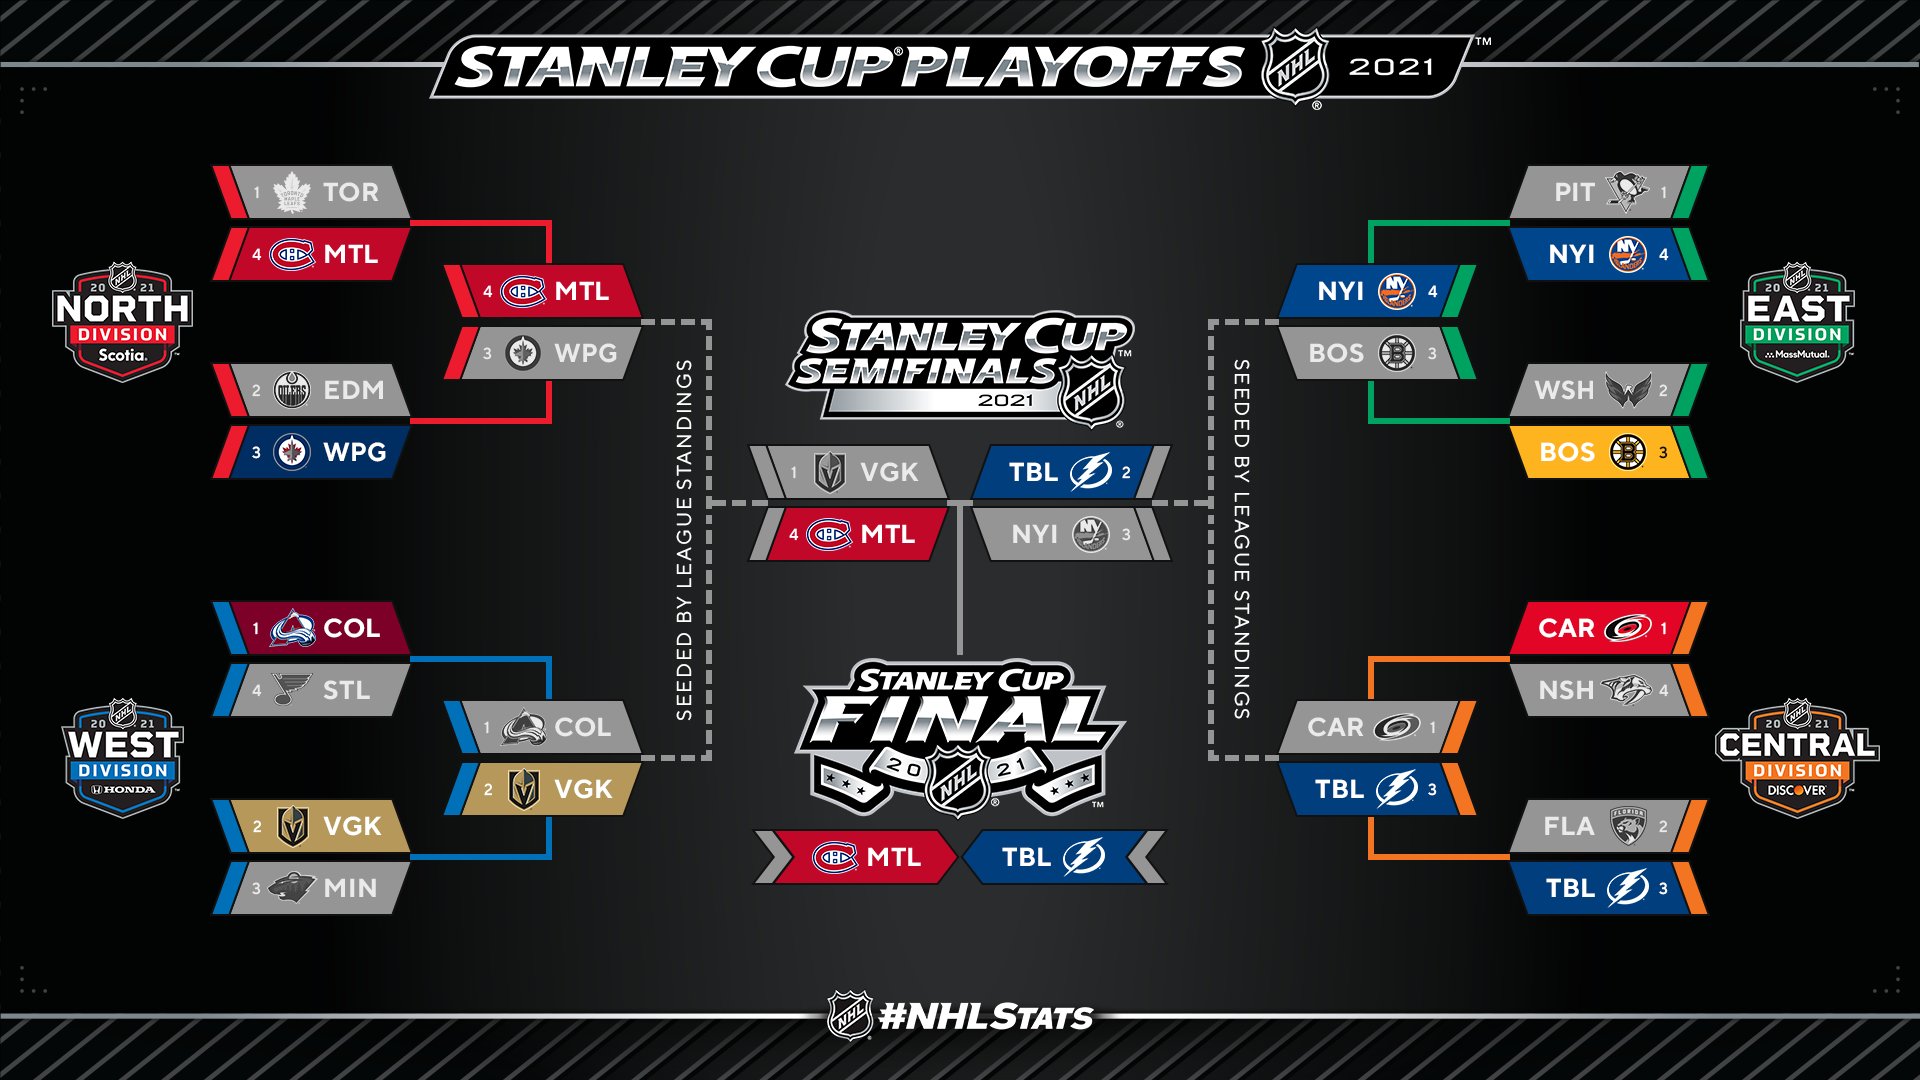 2021 Stanley Cup Final: Analysis, schedule and TV info – The Swing of